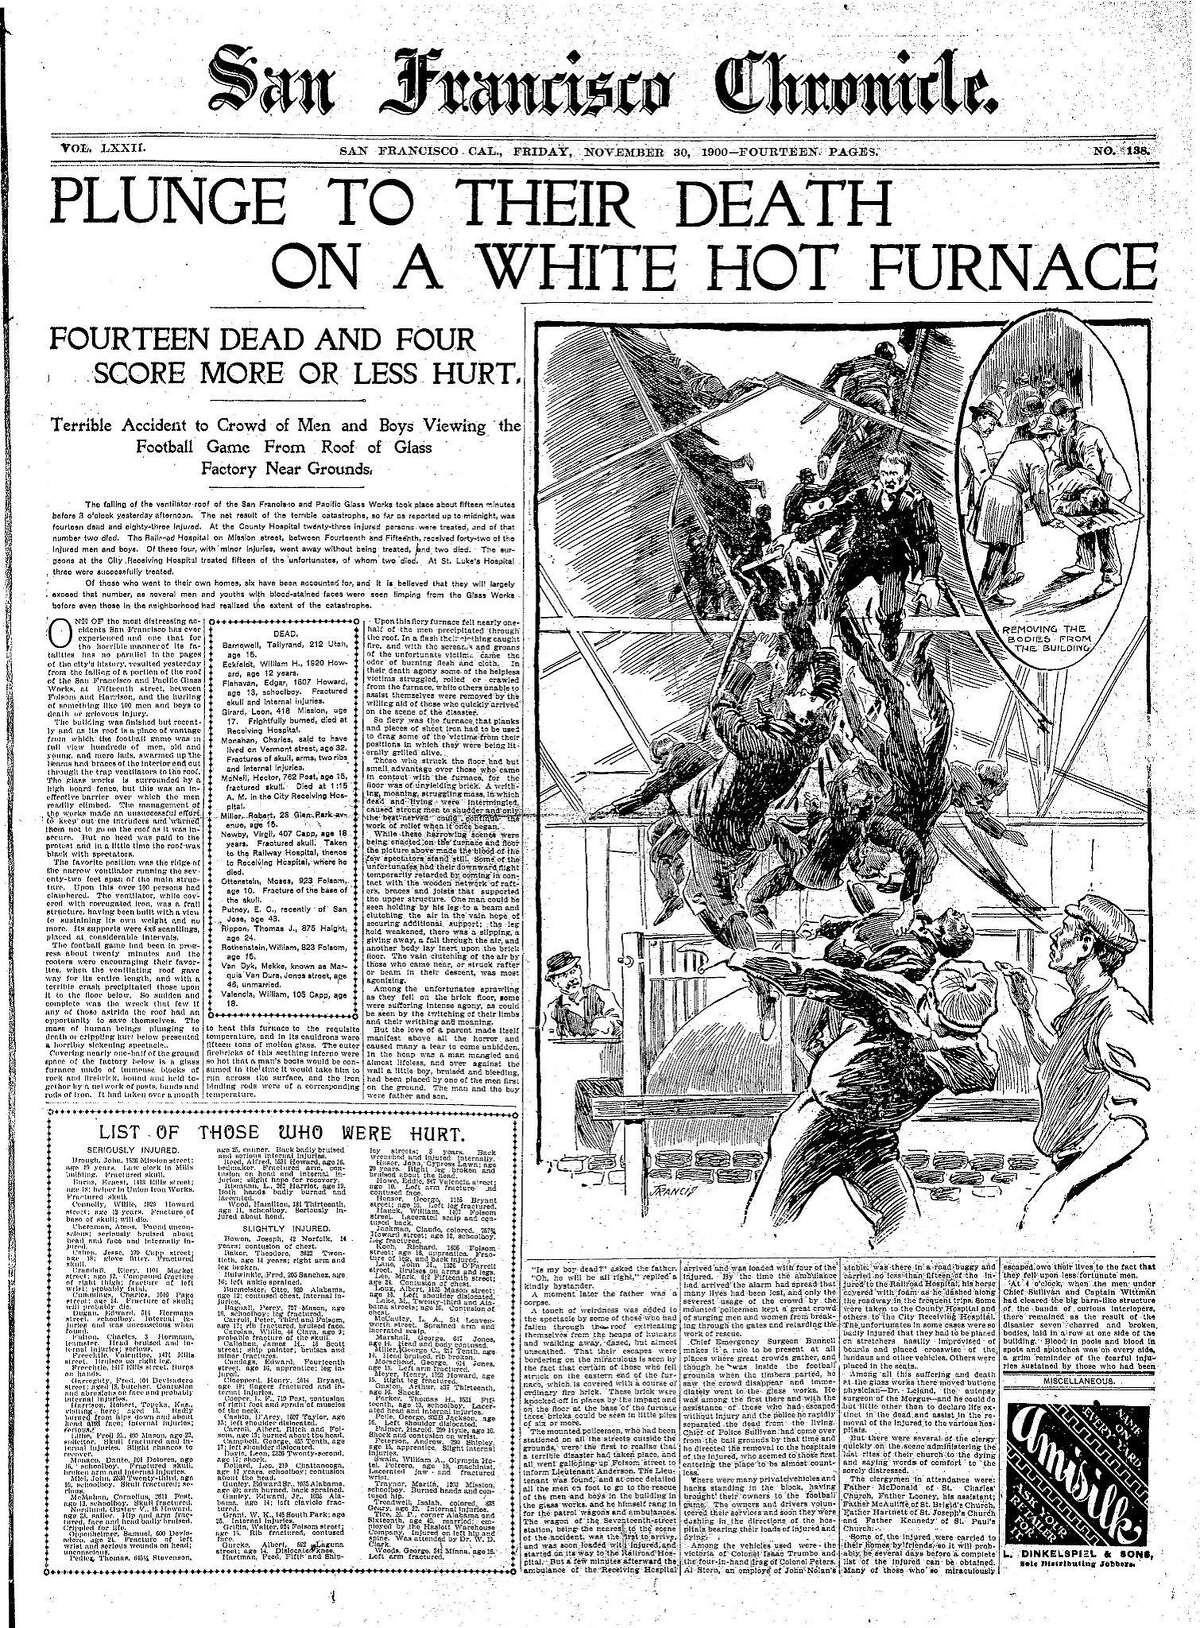 Historic Chronicle Front Page November 30, 1900